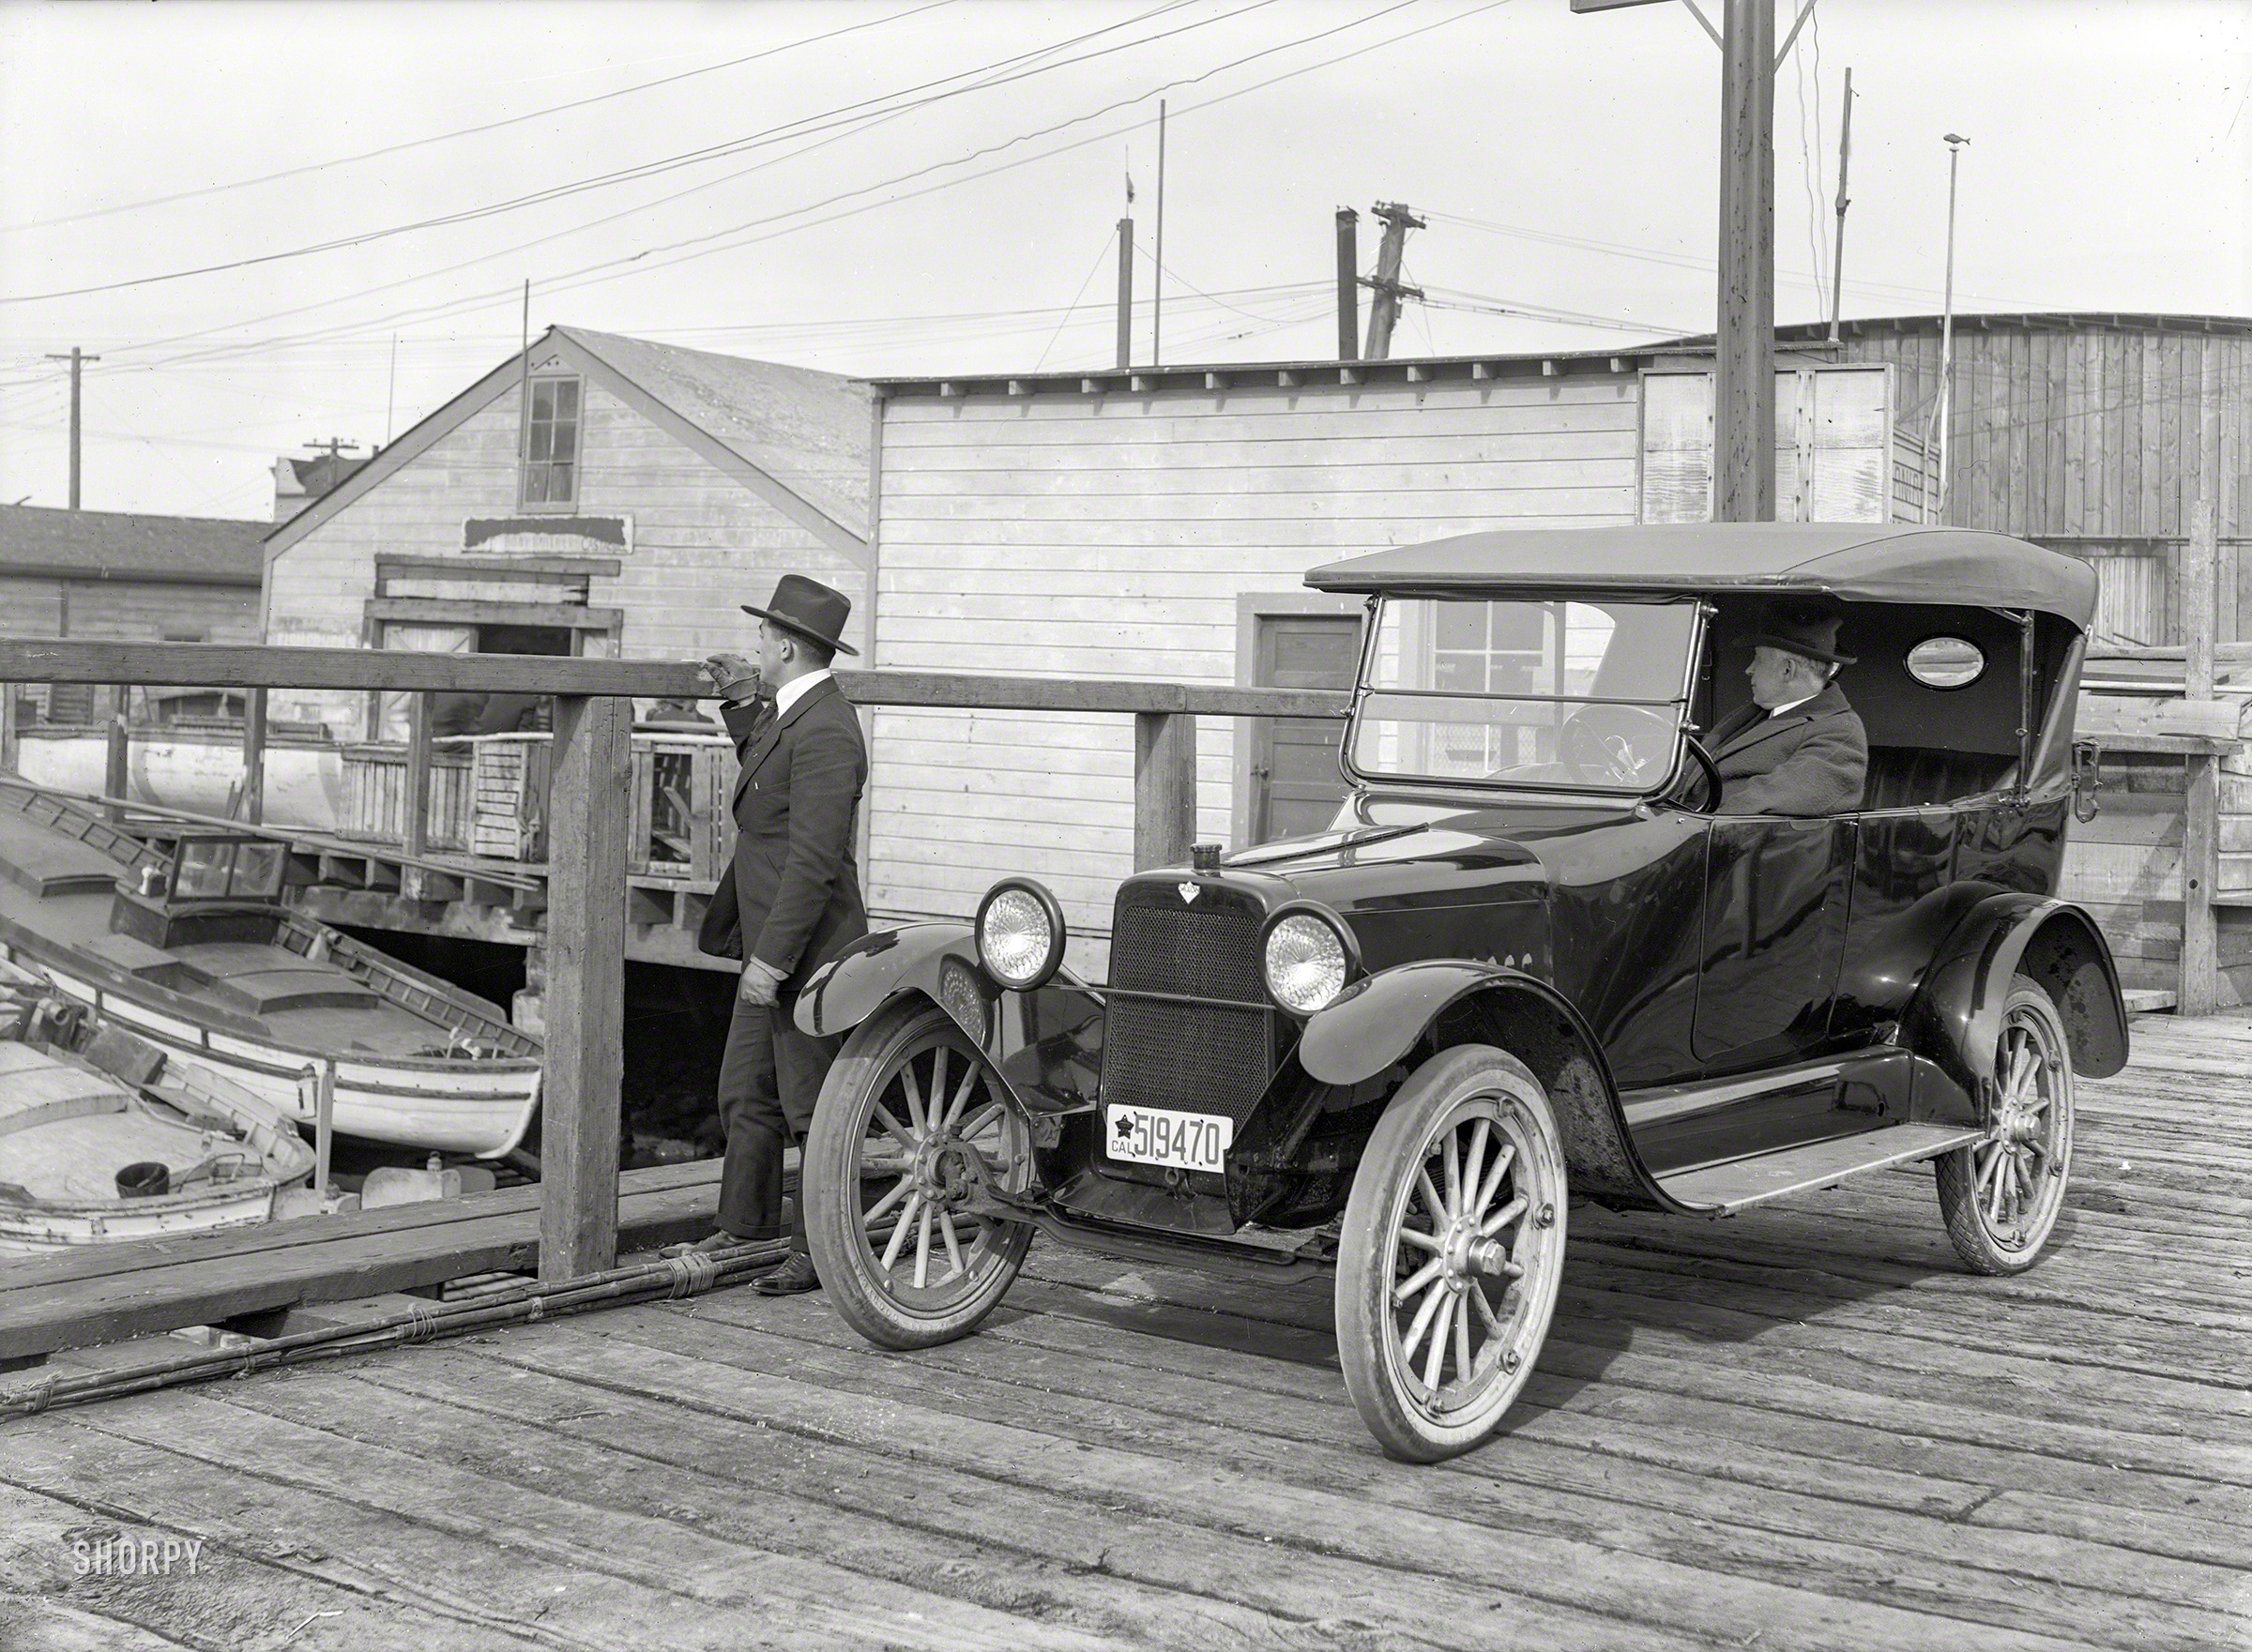 &nbsp; &nbsp; &nbsp; &nbsp; Saxon, the seventh largest American car maker in 1917, went wheels-up in 1922.

San Francisco, 1919. "Saxon touring car at boatyard." Today's entry on the Shorpy Roster of Musty Marques. 5x7 glass negative by Chris Helin. View full size.